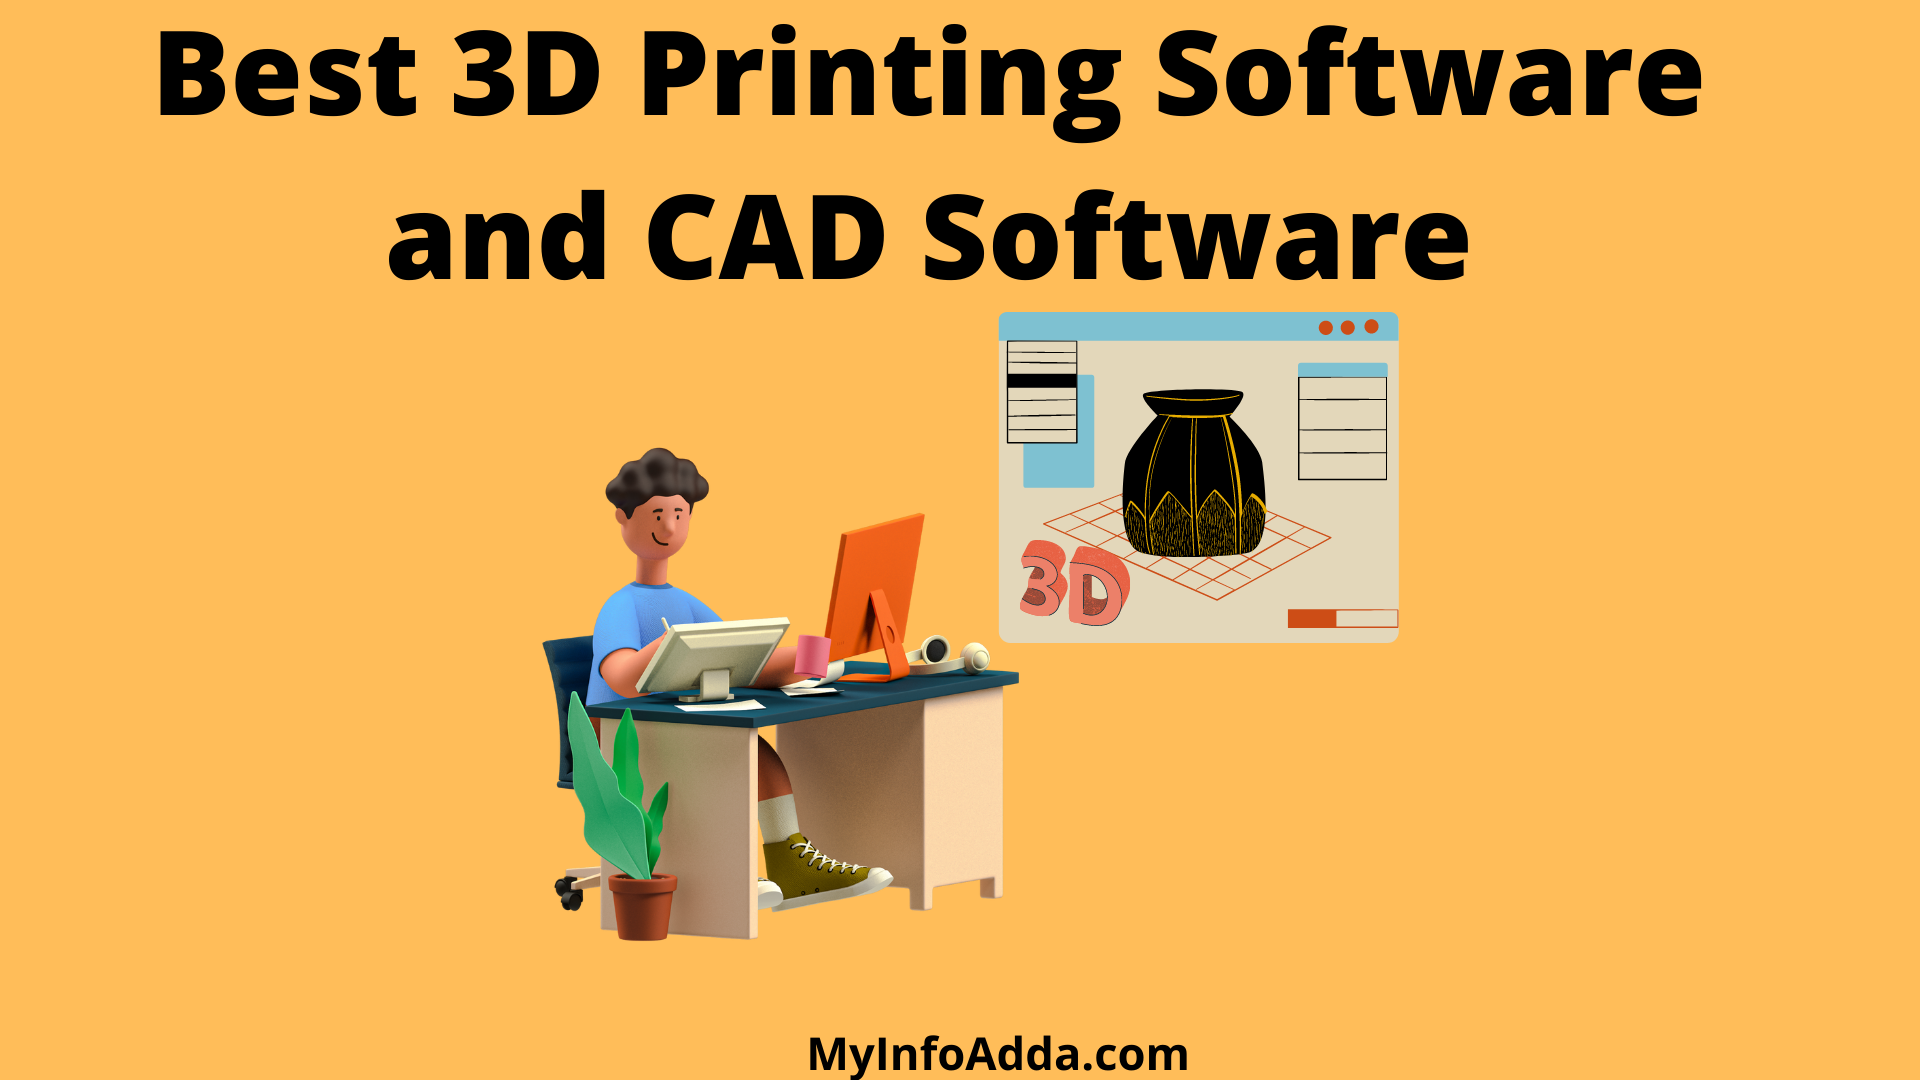 Best 3D Printing Software and CAD Software